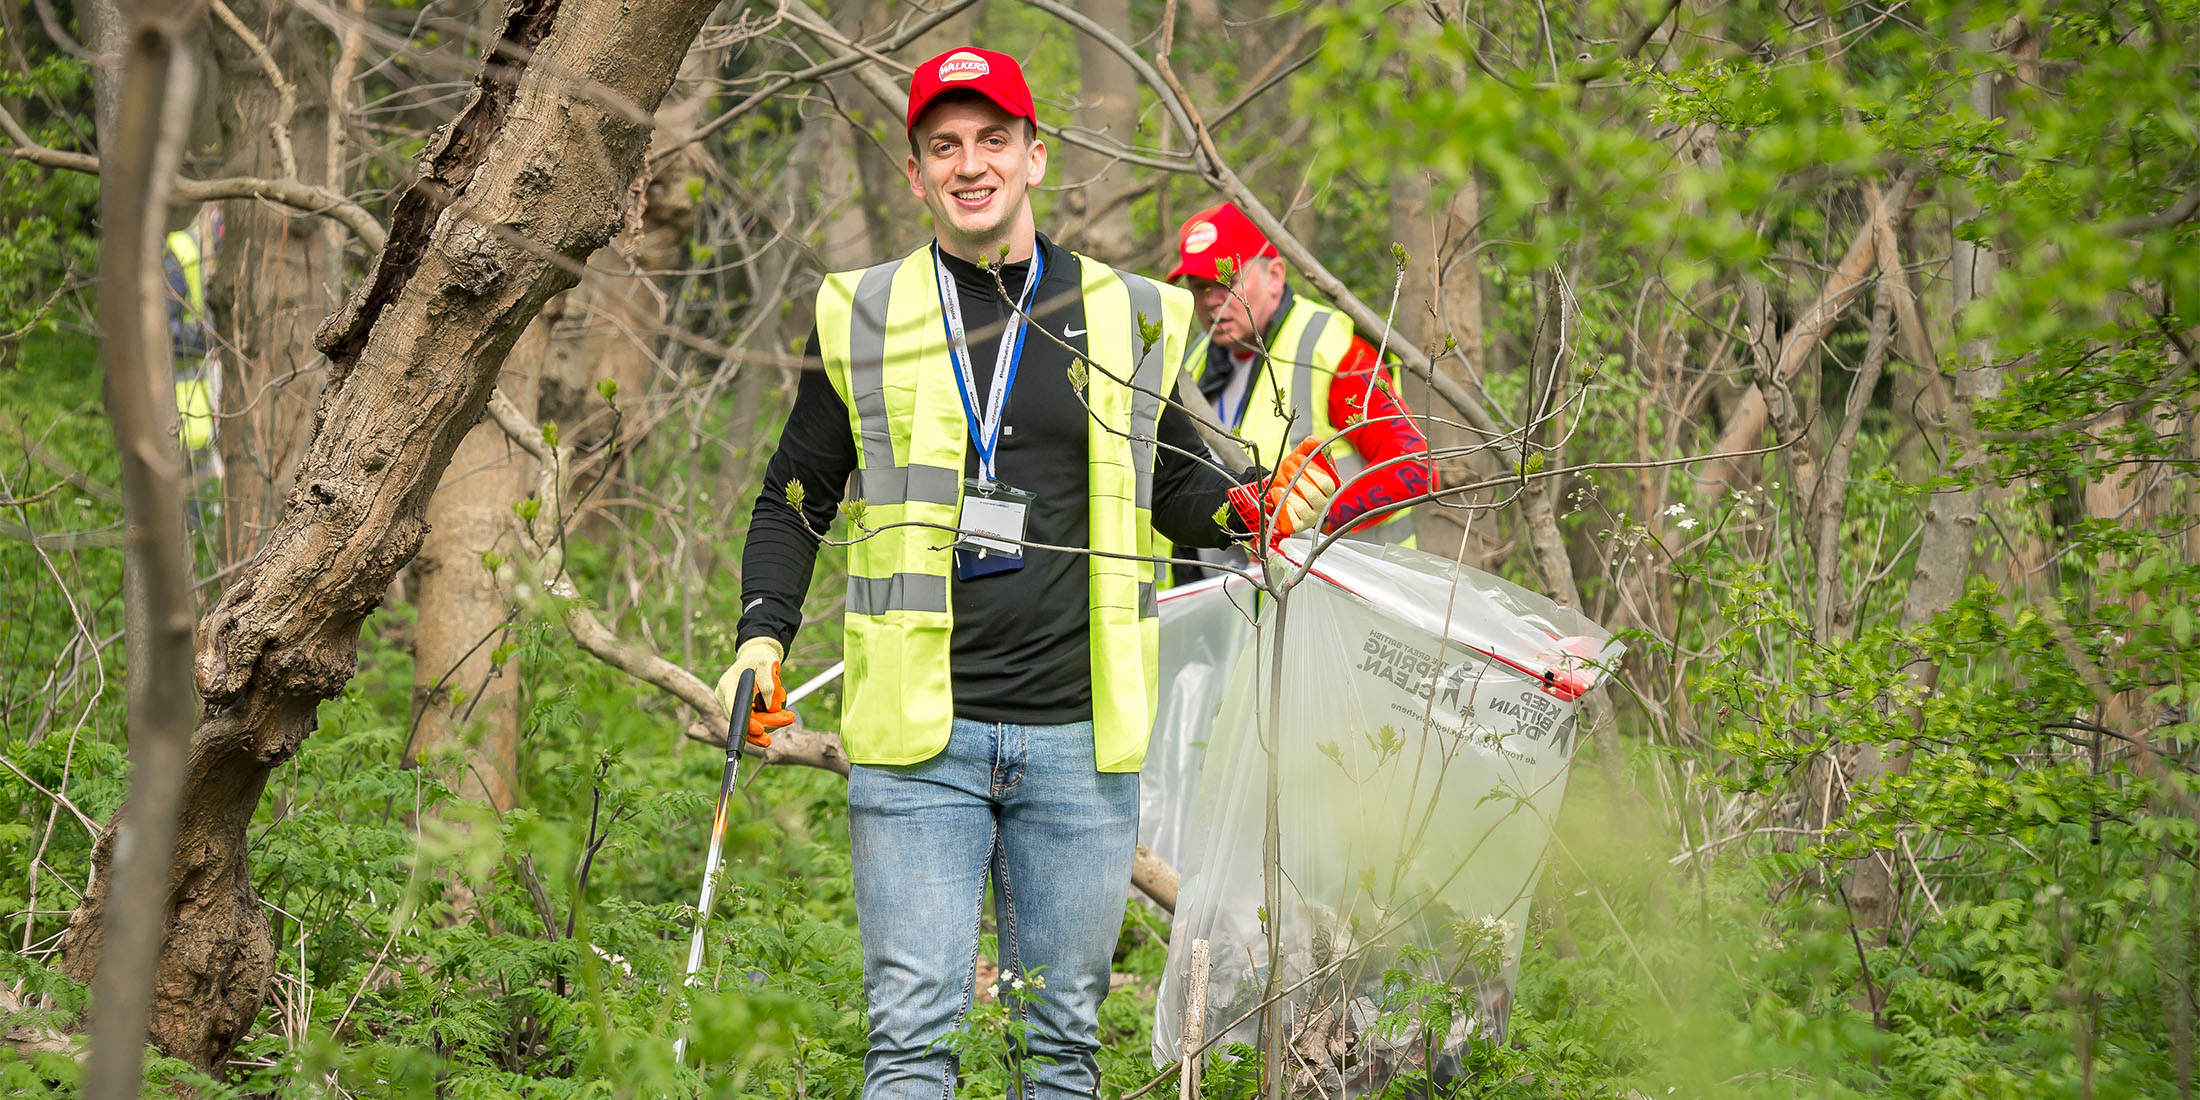 Employees picking up trash in the woods